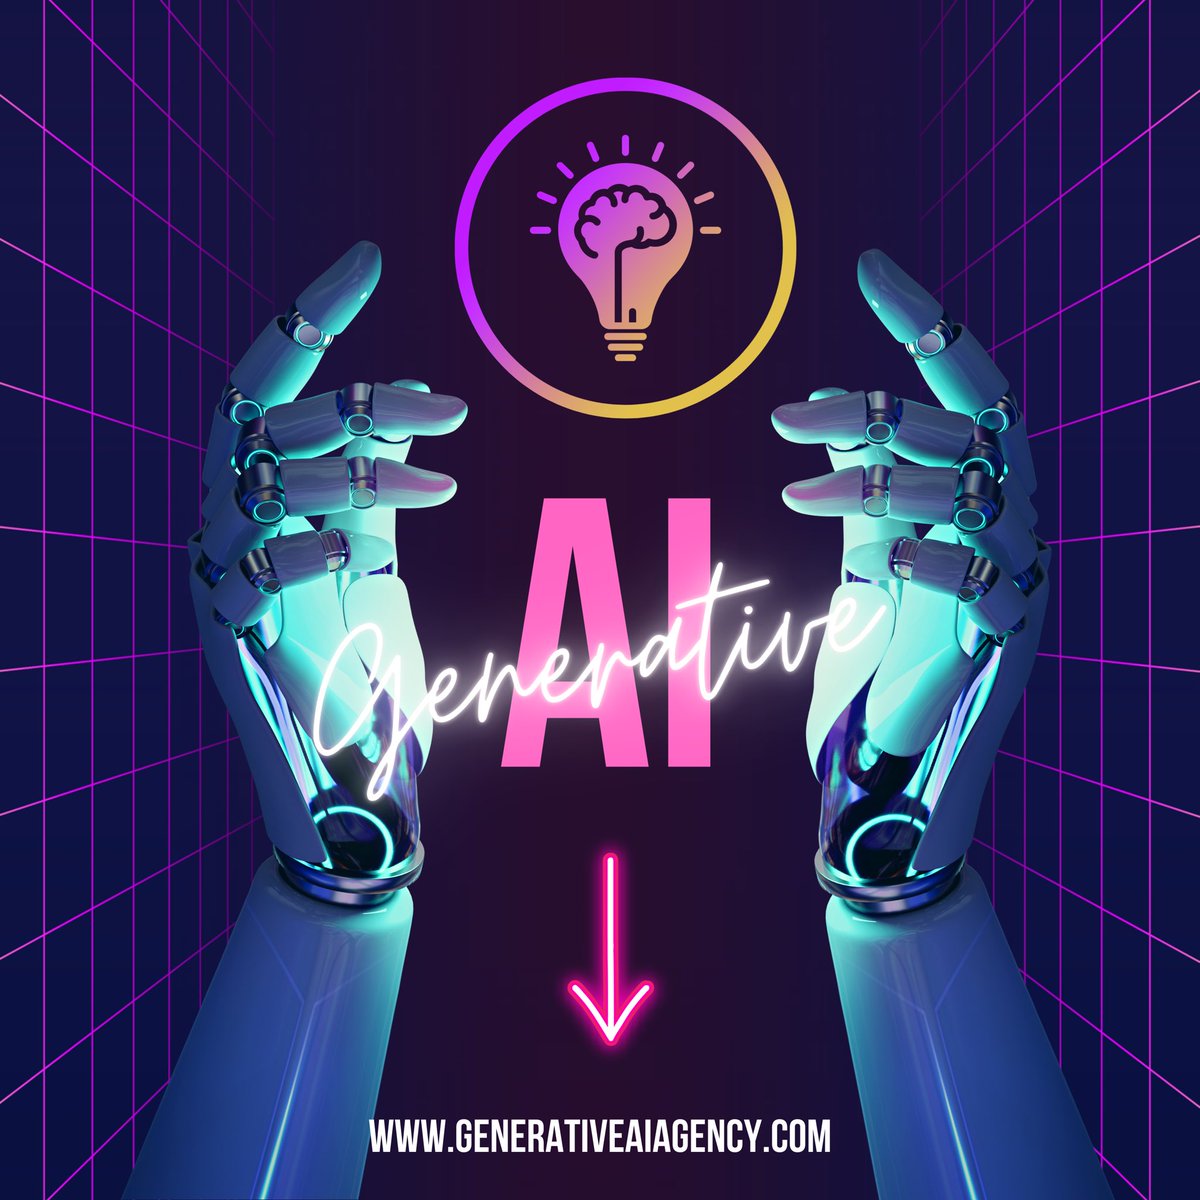 Envisioning a future driven by AI and creativity? 🧠💡 I've got just the domain to fuel your dreams. DM now, let's propel your journey in the world of generative AI. 🚀 #DomainInvestment #AI #MachineLearning #ArtificialIntelligence #TechStartups